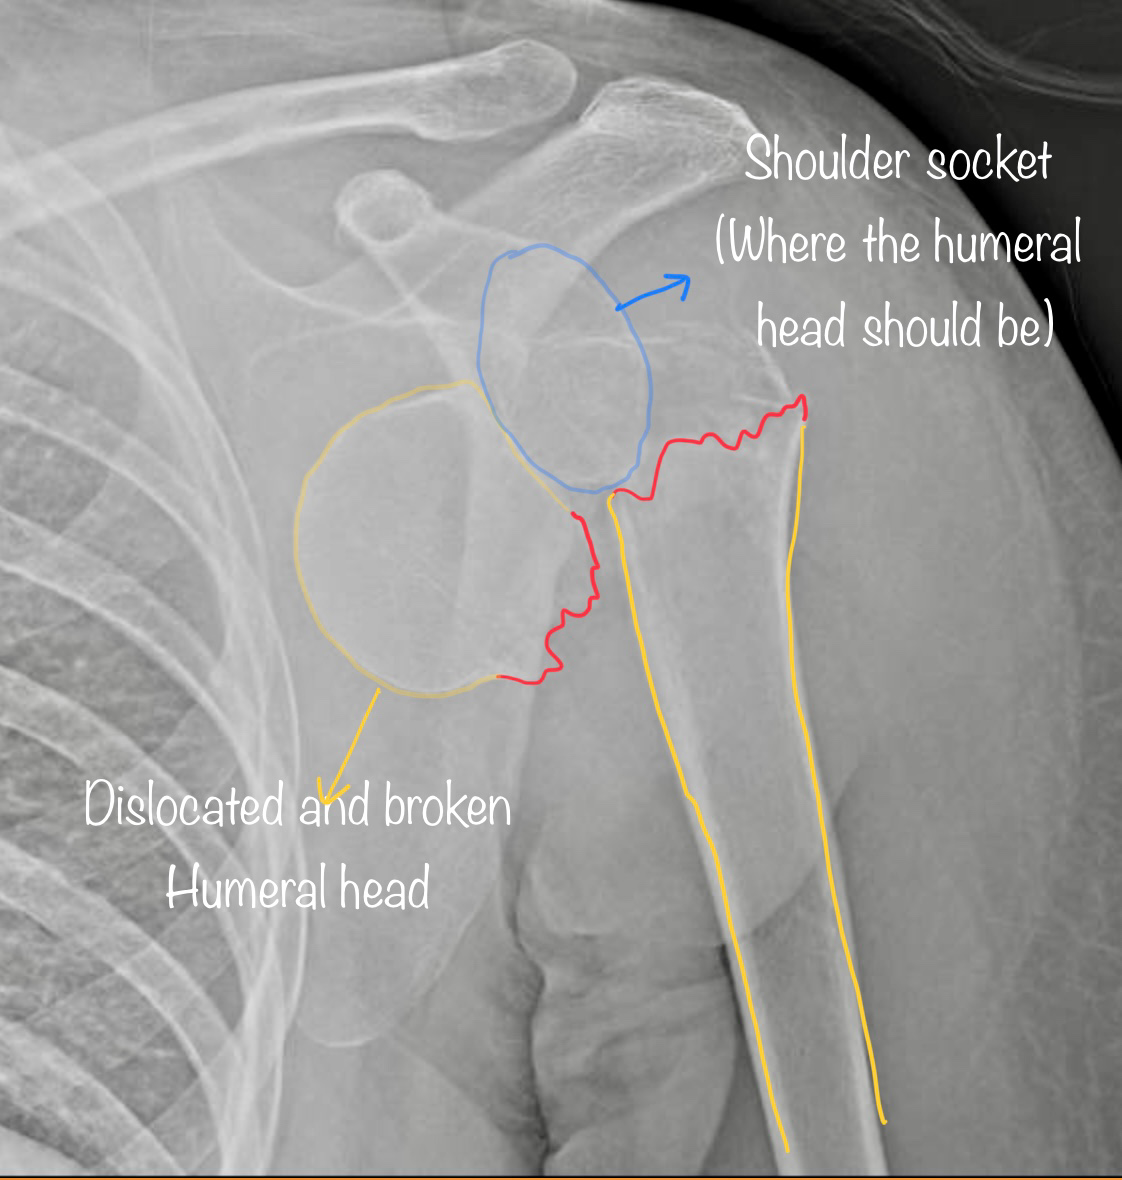 Proximal humerus fracture dislocation